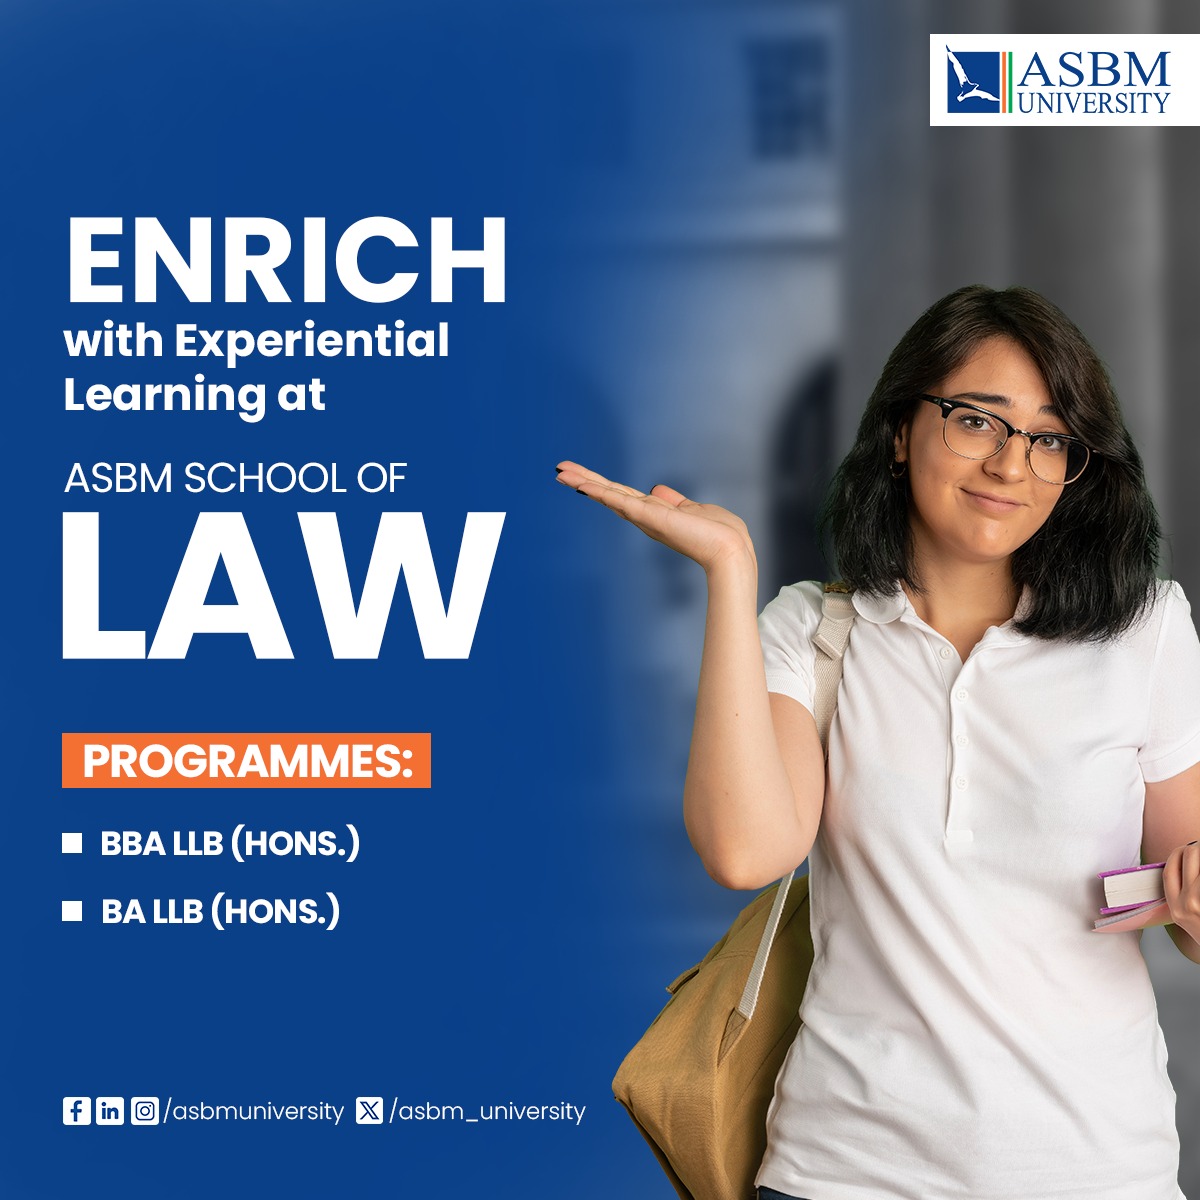 Ignite your aspirations for a career in legal functions.

Admissions are open for graduate programs at ASBM School of Law.

#ASBMUniversity #SchoolofLaw #InspiringMinds